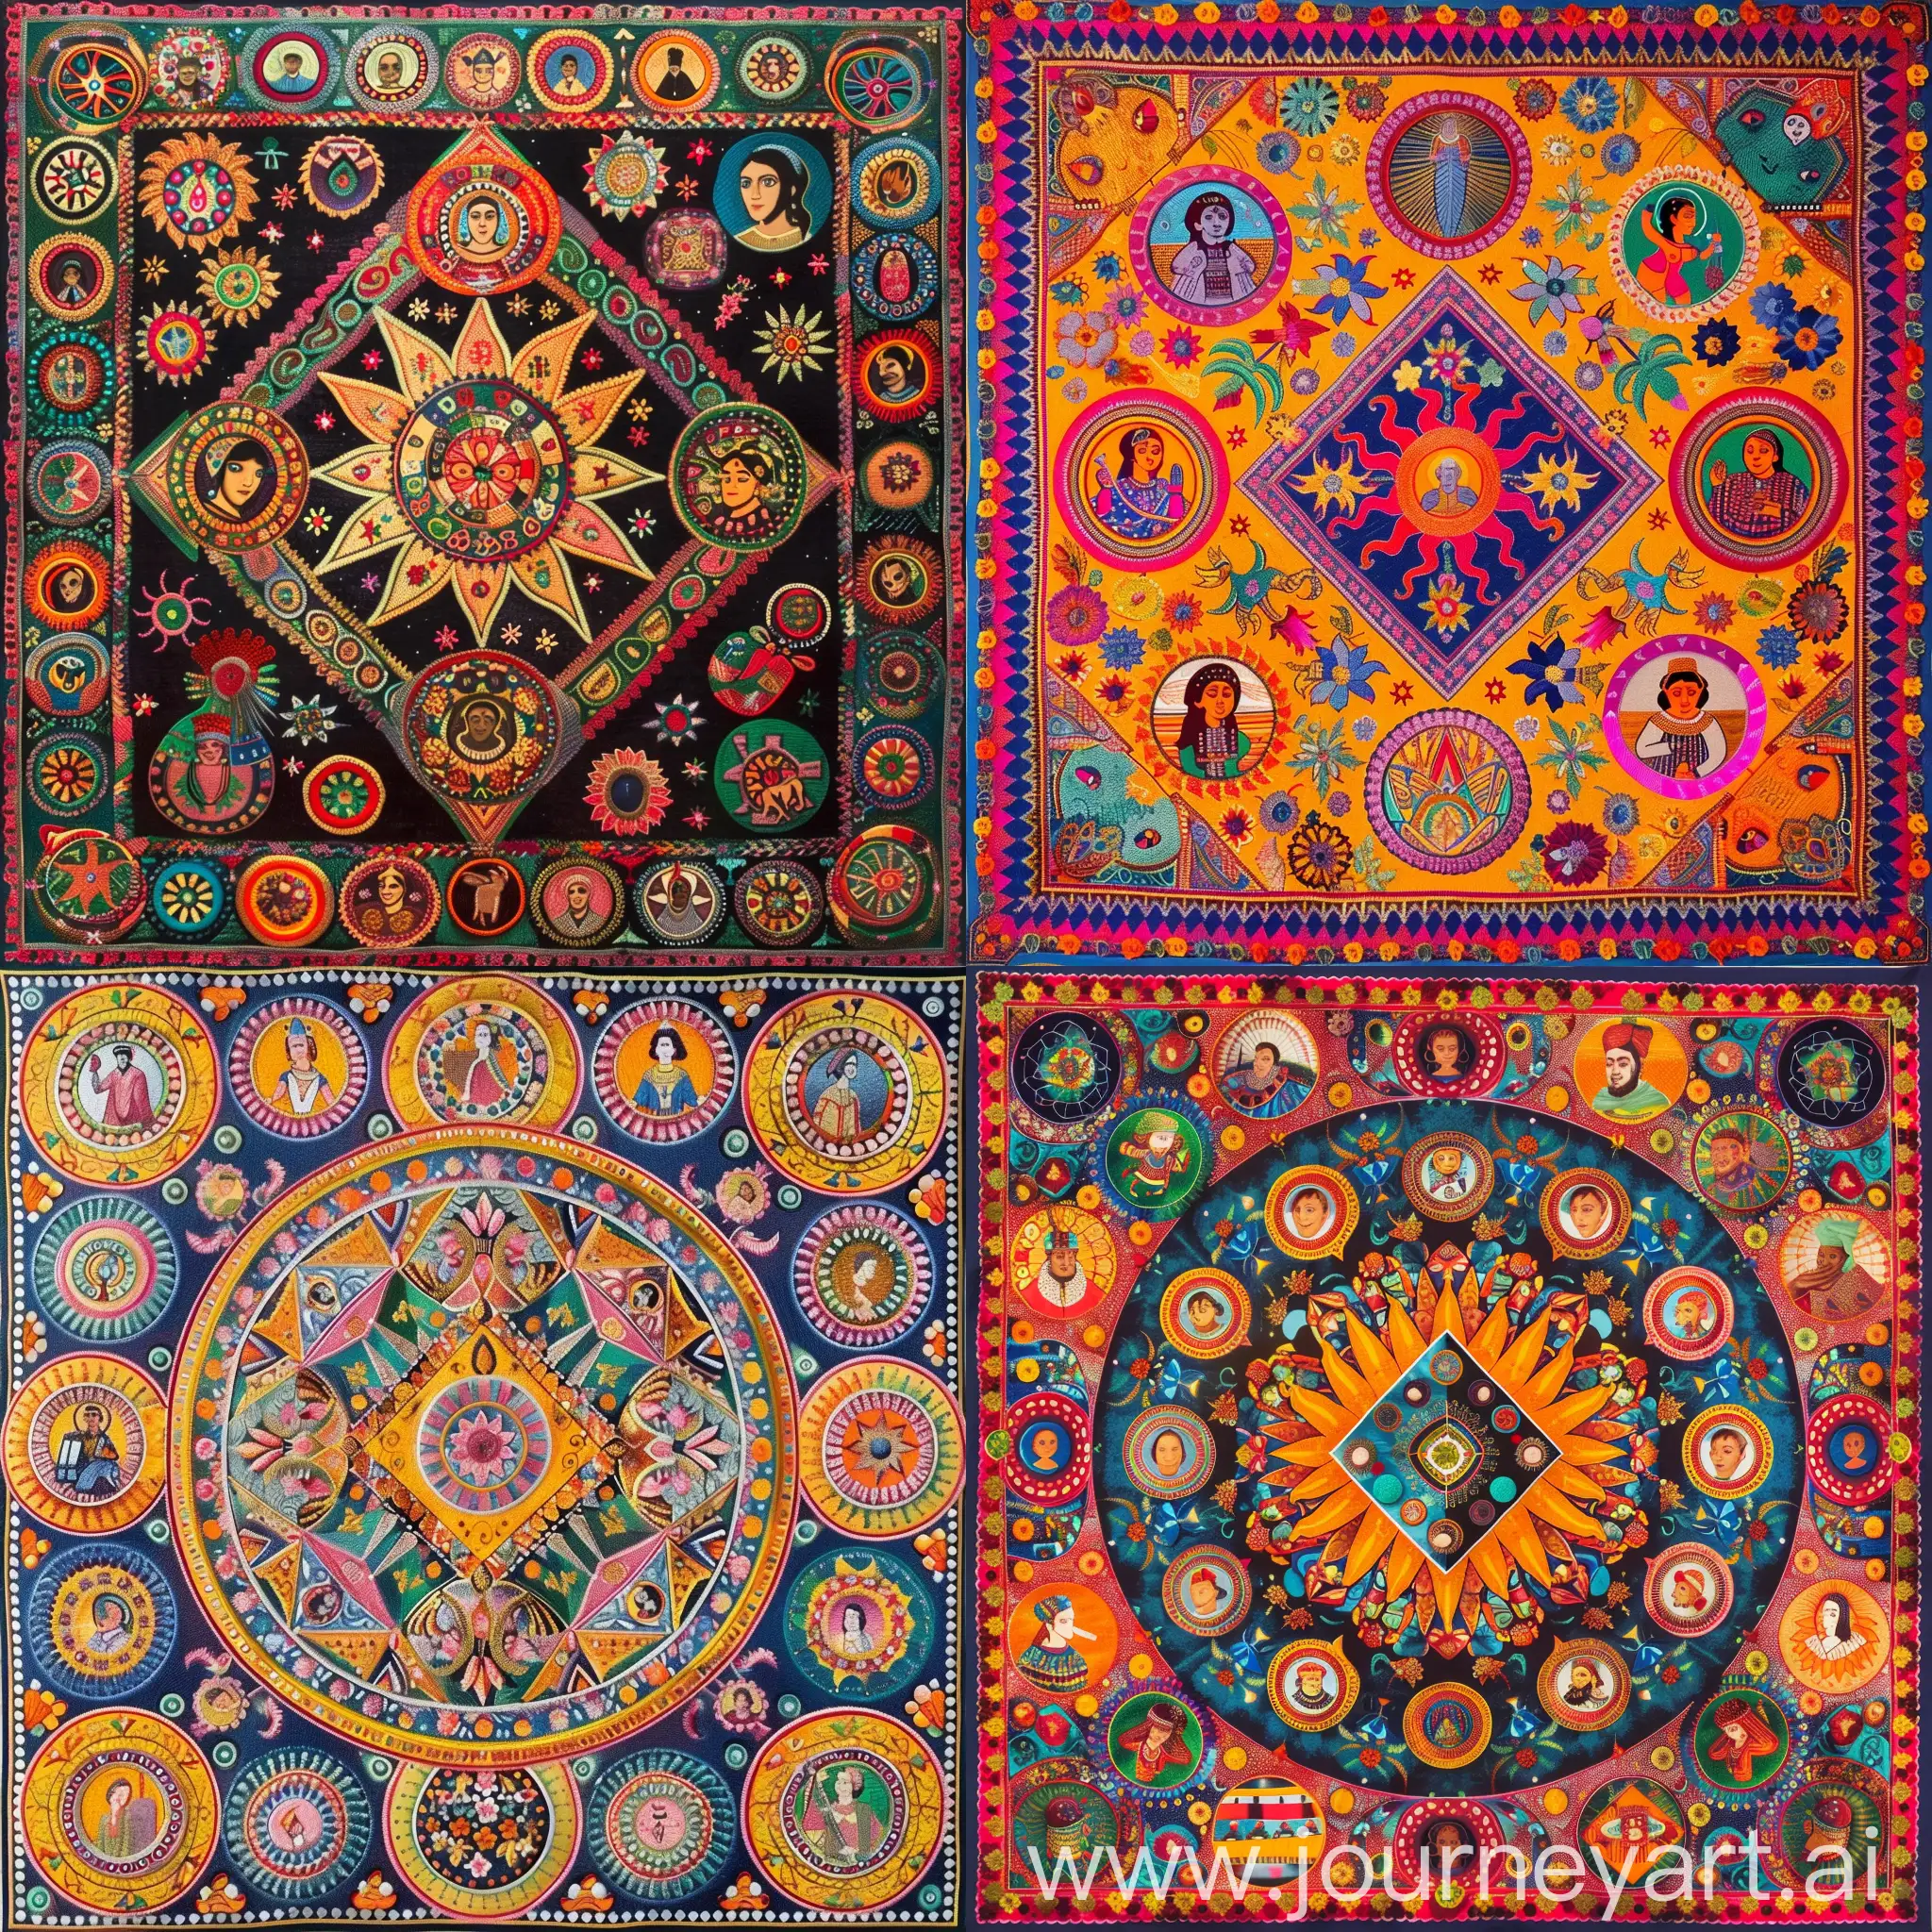 a vibrant piece of art with a central diamond-shaped sun design, surrounded by smaller circular motifs with historical or cultural figures. The intricate patterns and colorful details suggest it may be a handcrafted textile